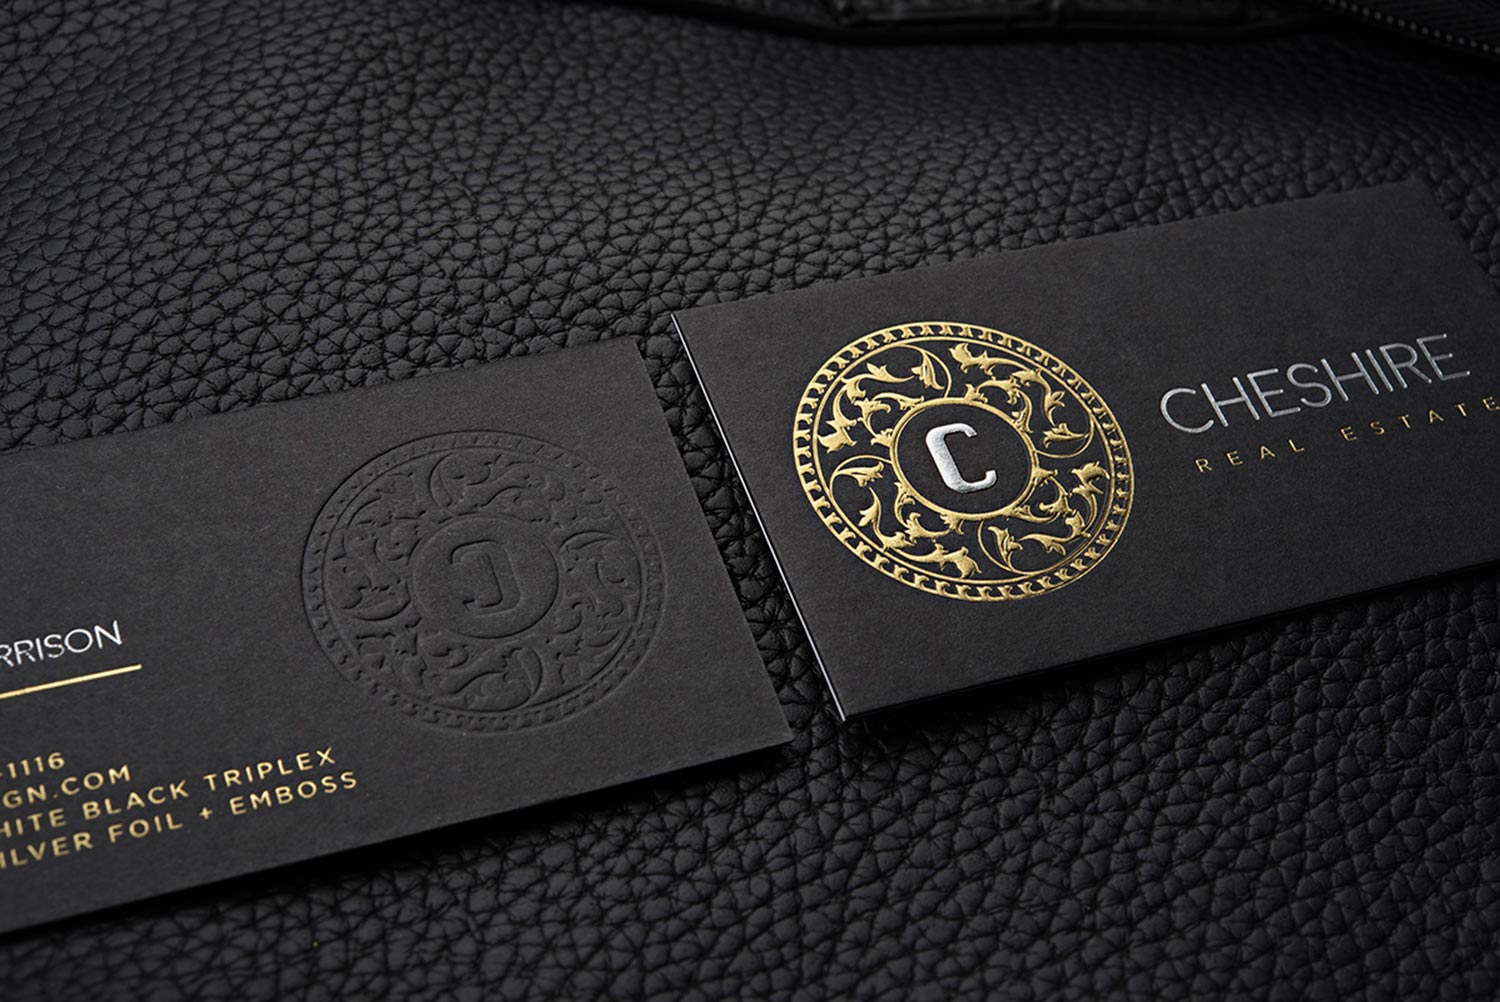 Elegant Cheshire Business Card Template with Gold and Silver Foil